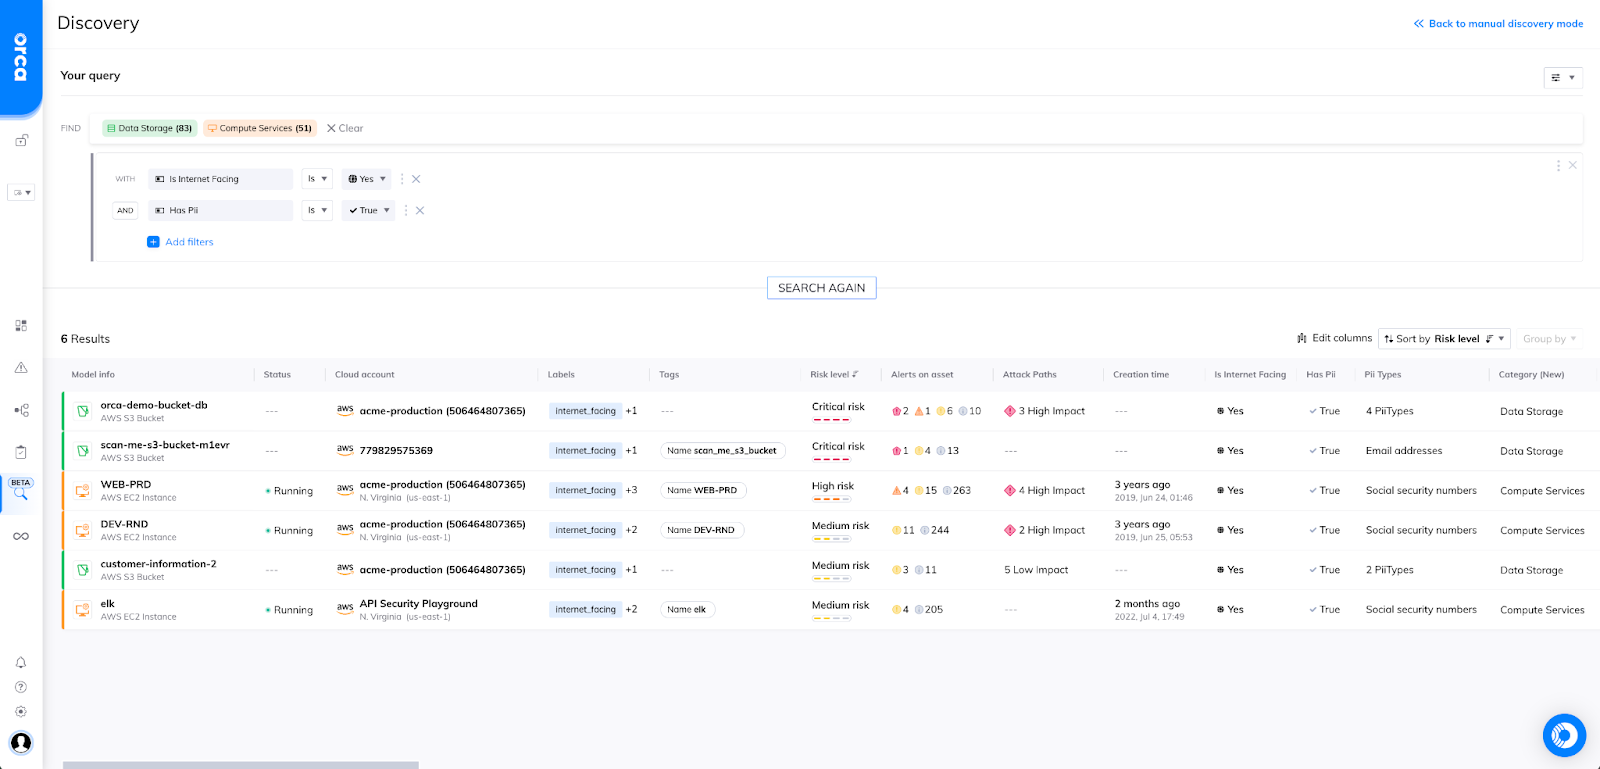 Discover and peruse asset and inventory information across their entire cloud estate, or select options in a guided query builder.